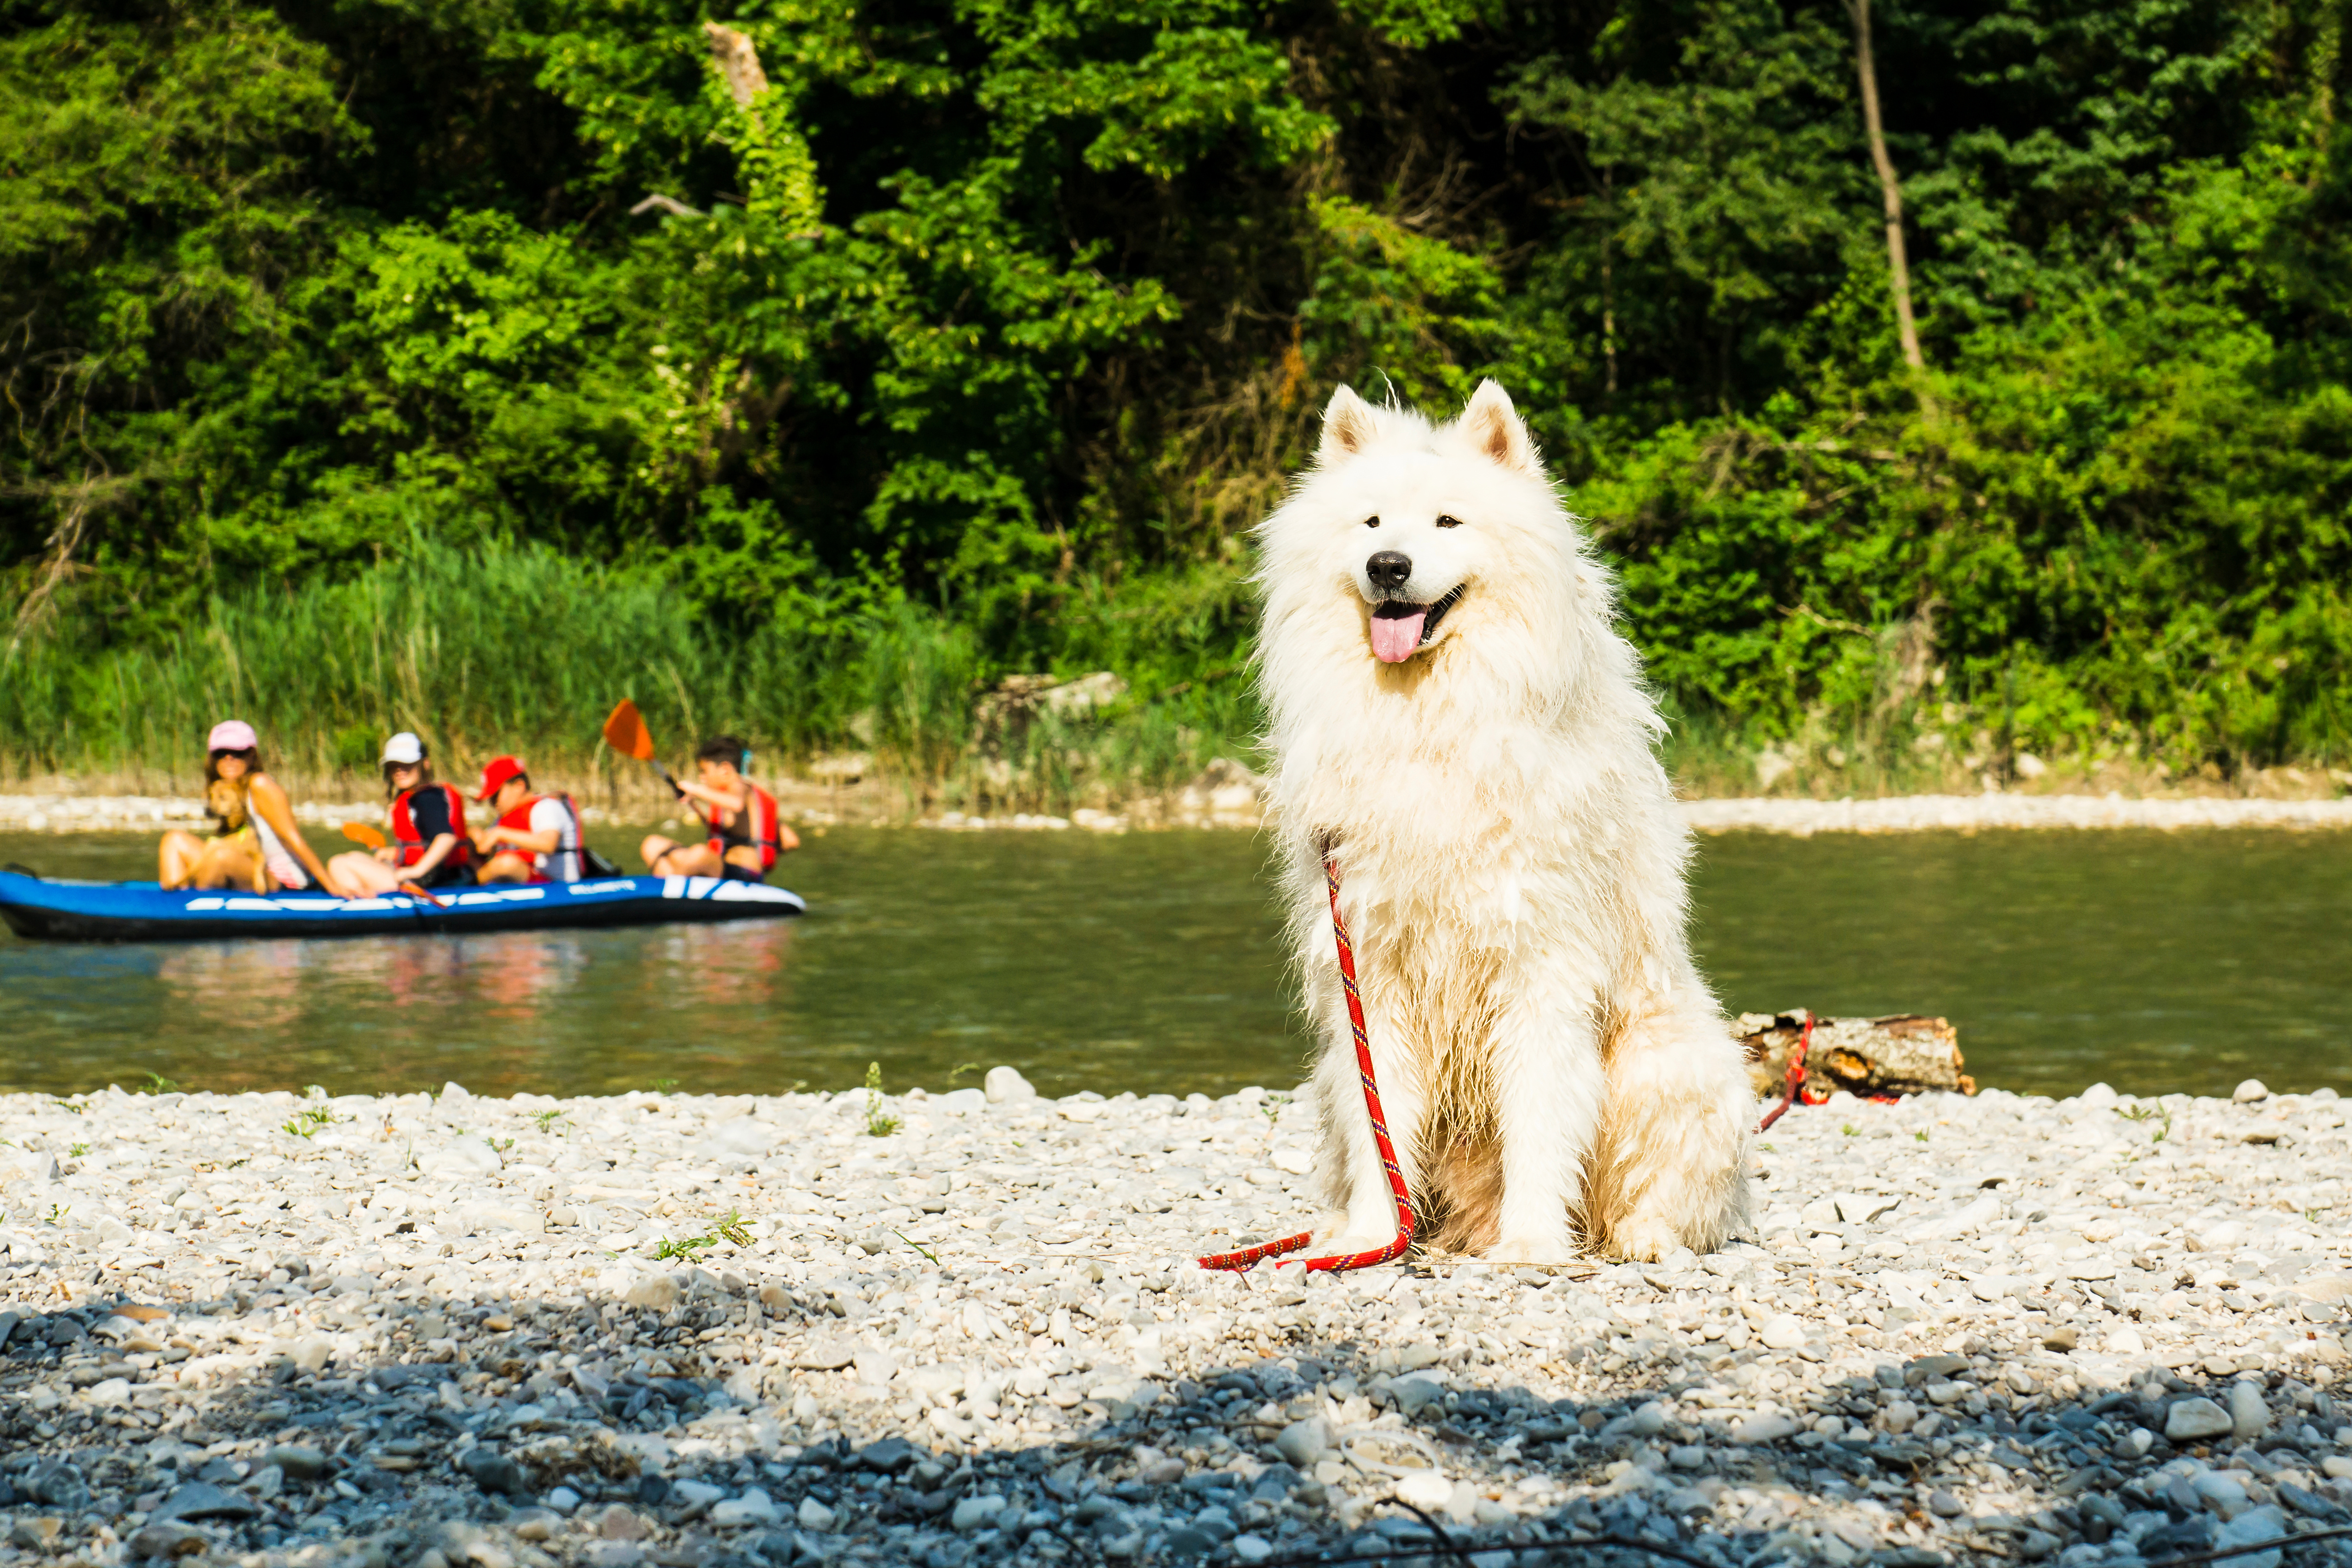 Wet Samoyed dog sitting on the pebbly river bank with tourists kayaking in the background along the Drome river.